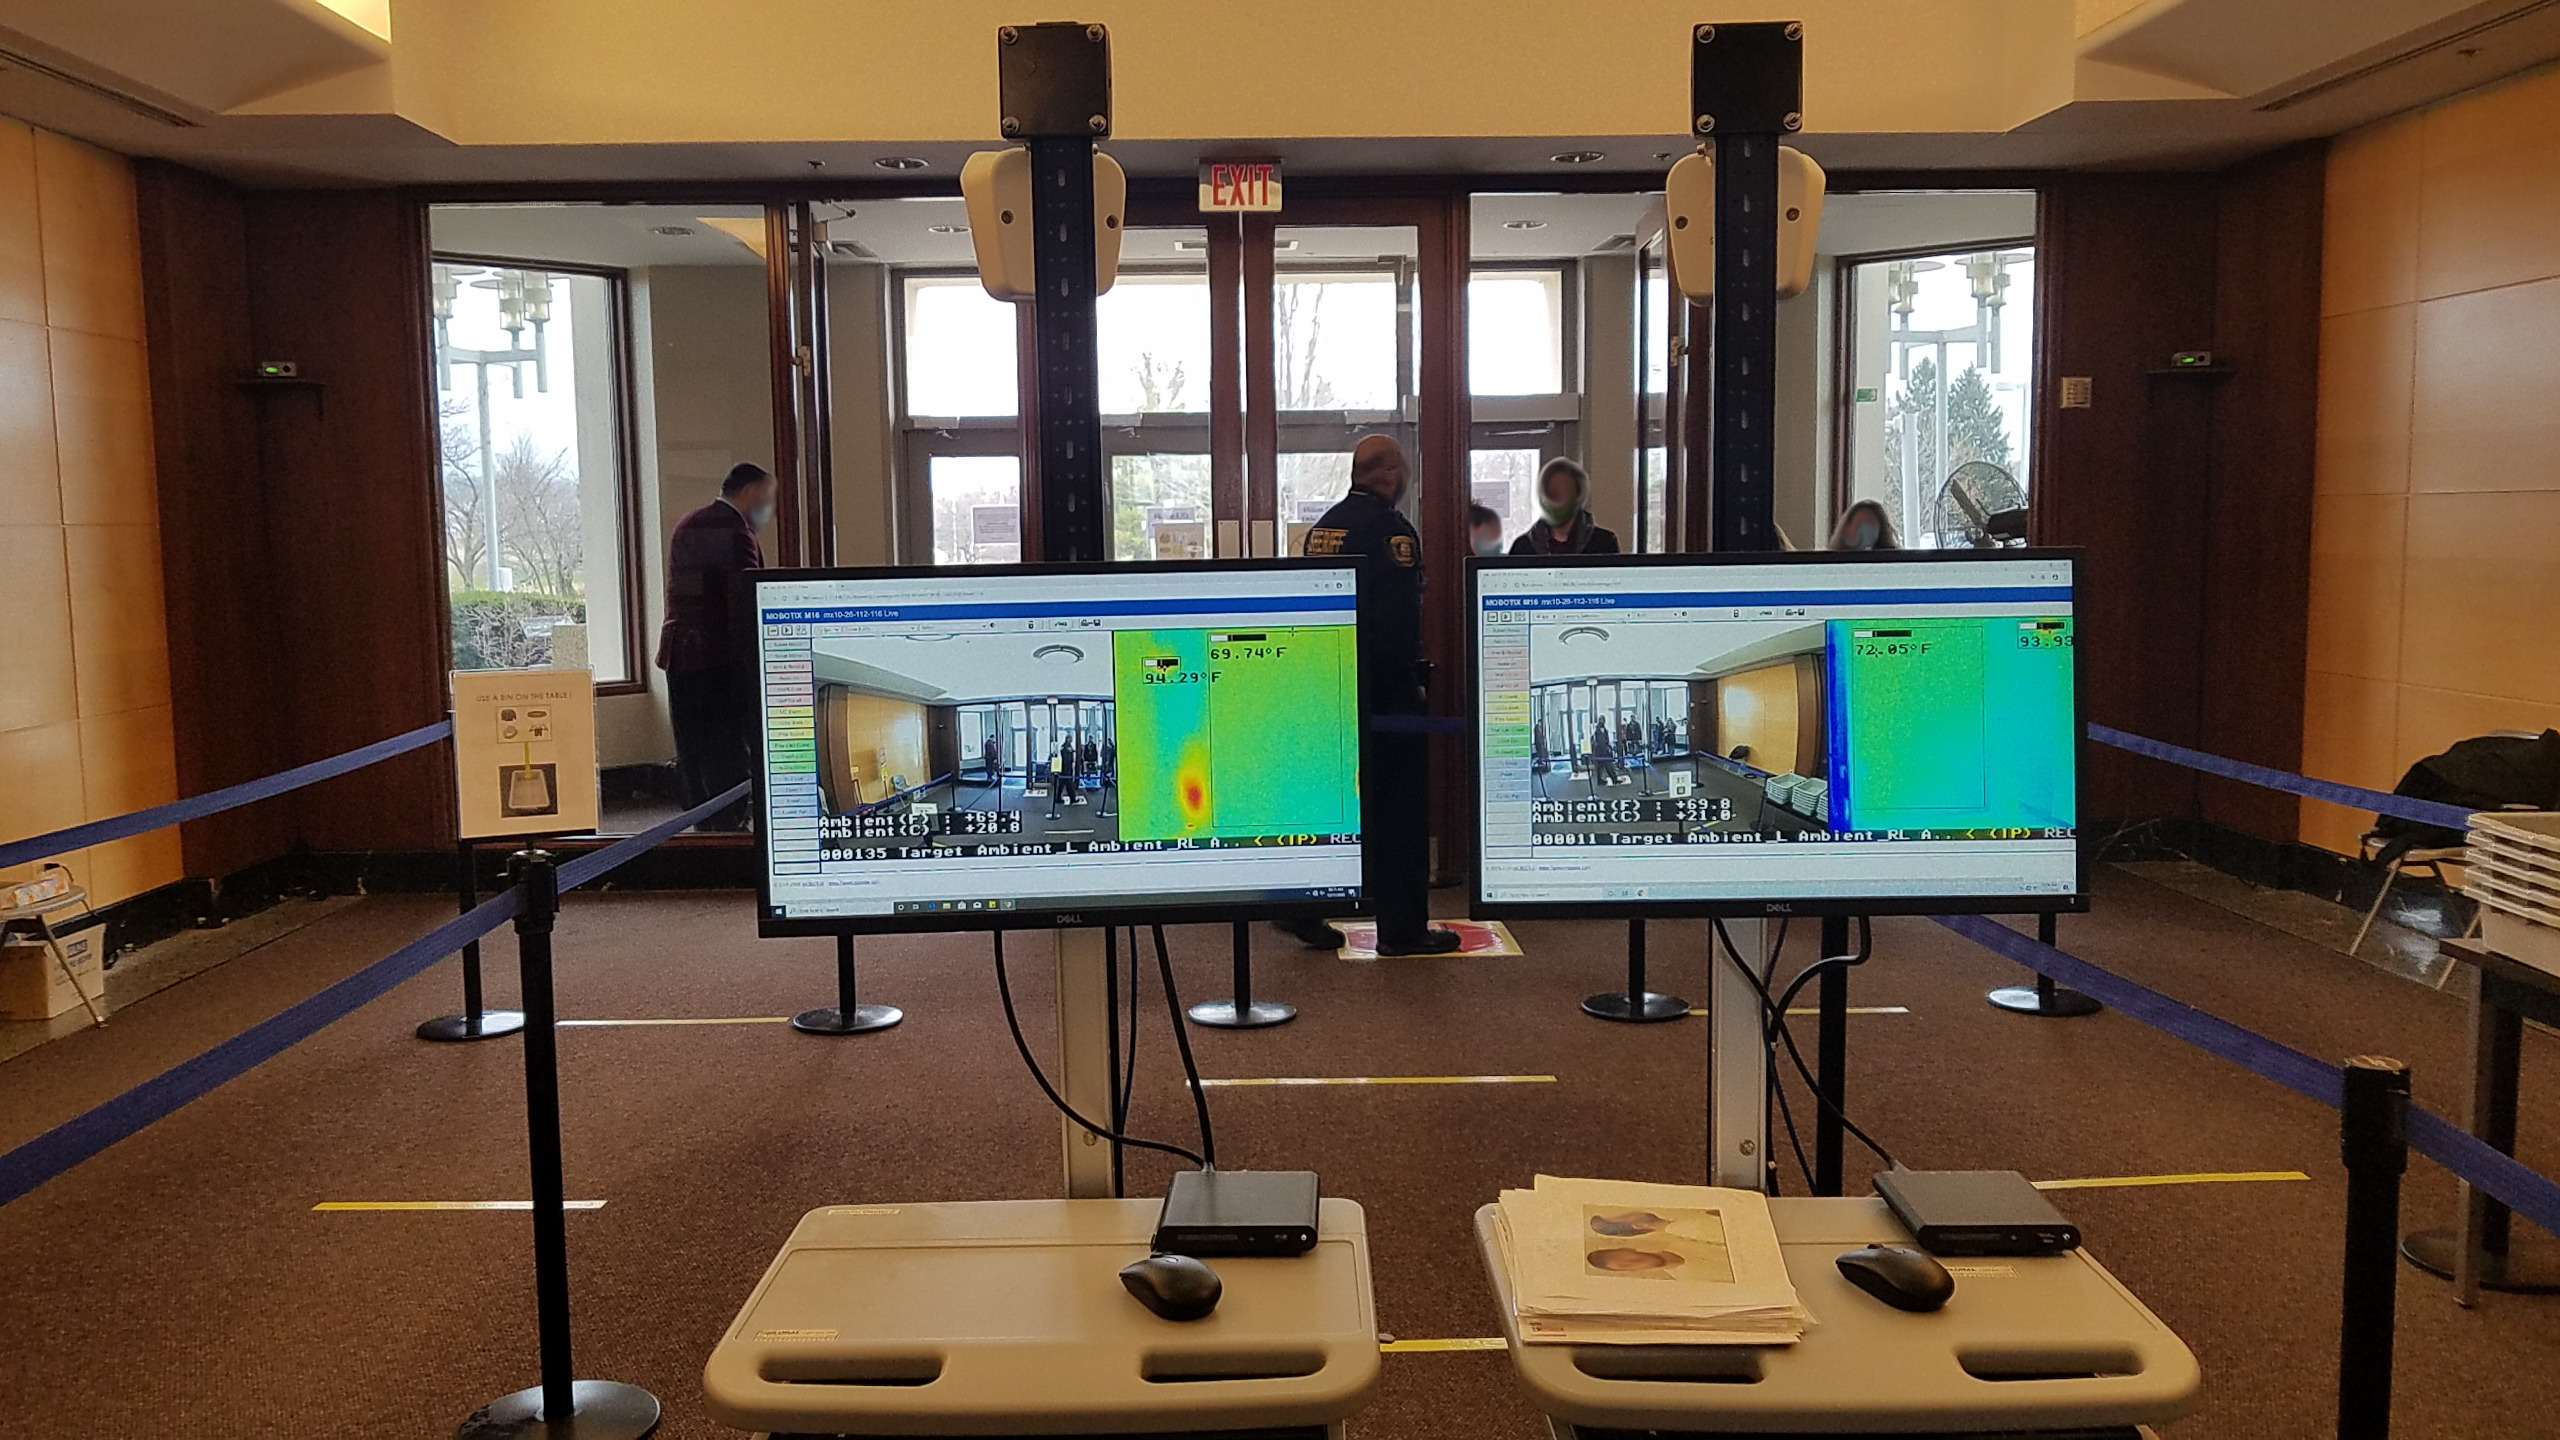 Security walk through with screens displaying thermal camera temperature readings and video surveillance